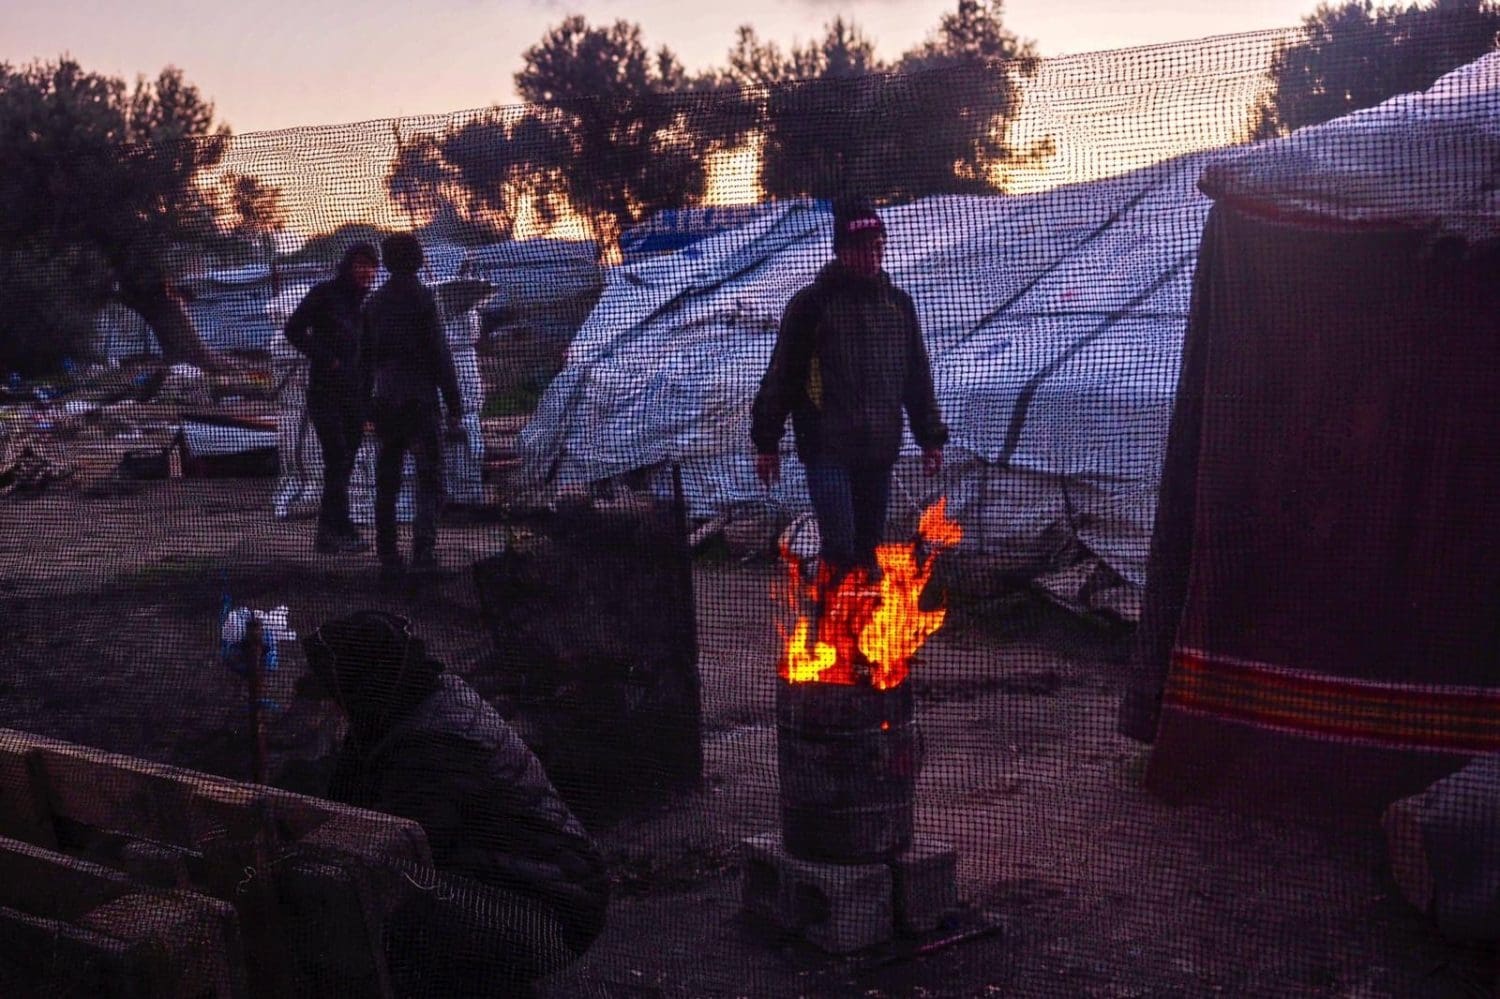 Some of the conditions at the state run Moria camp during Winter 2018